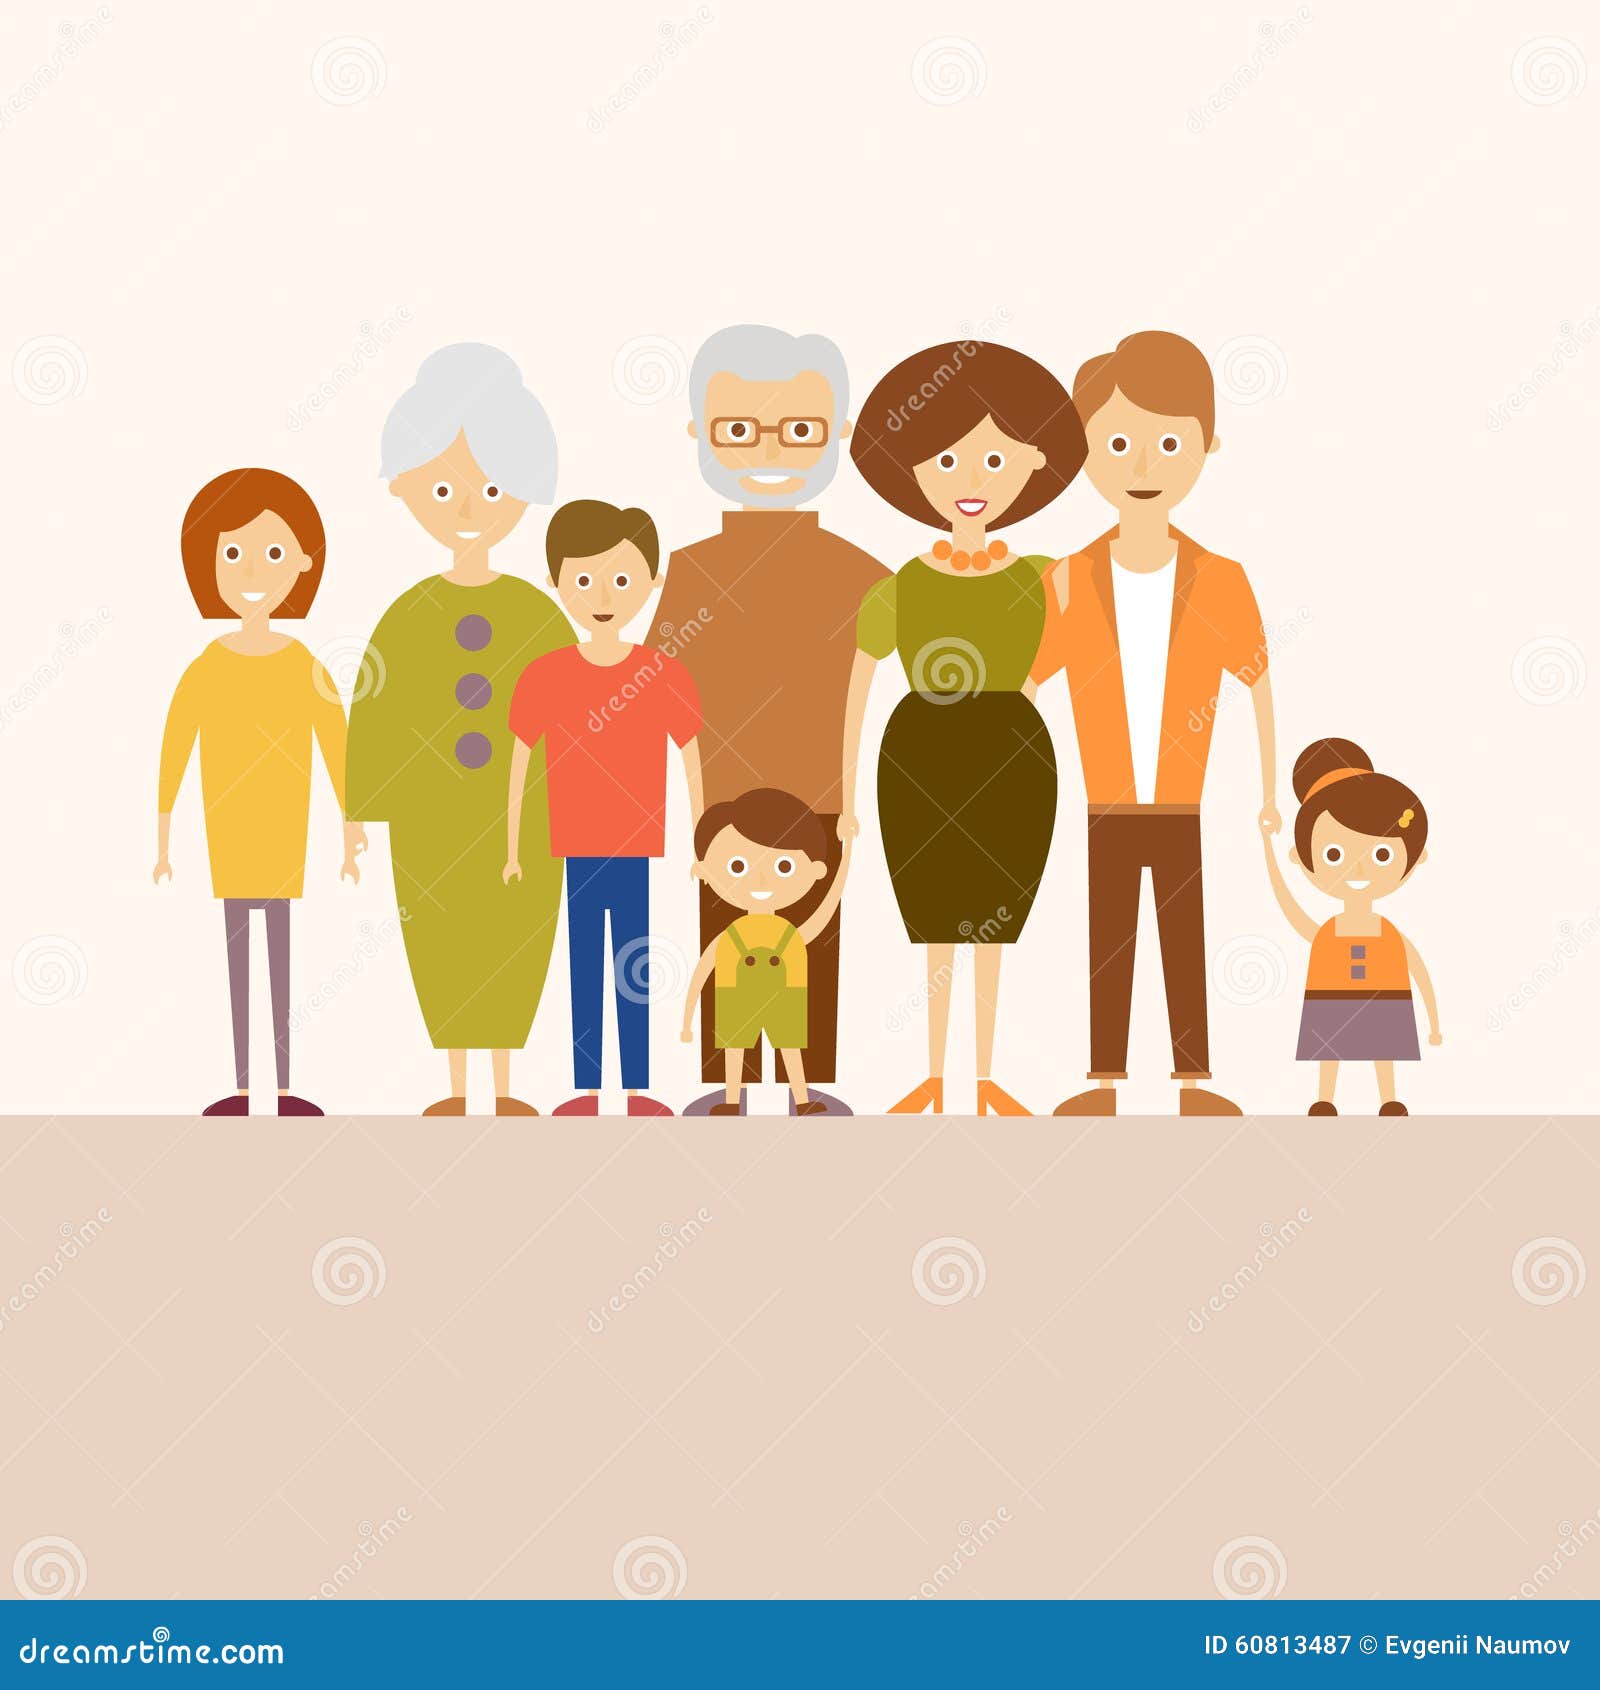 clipart of nuclear family - photo #50